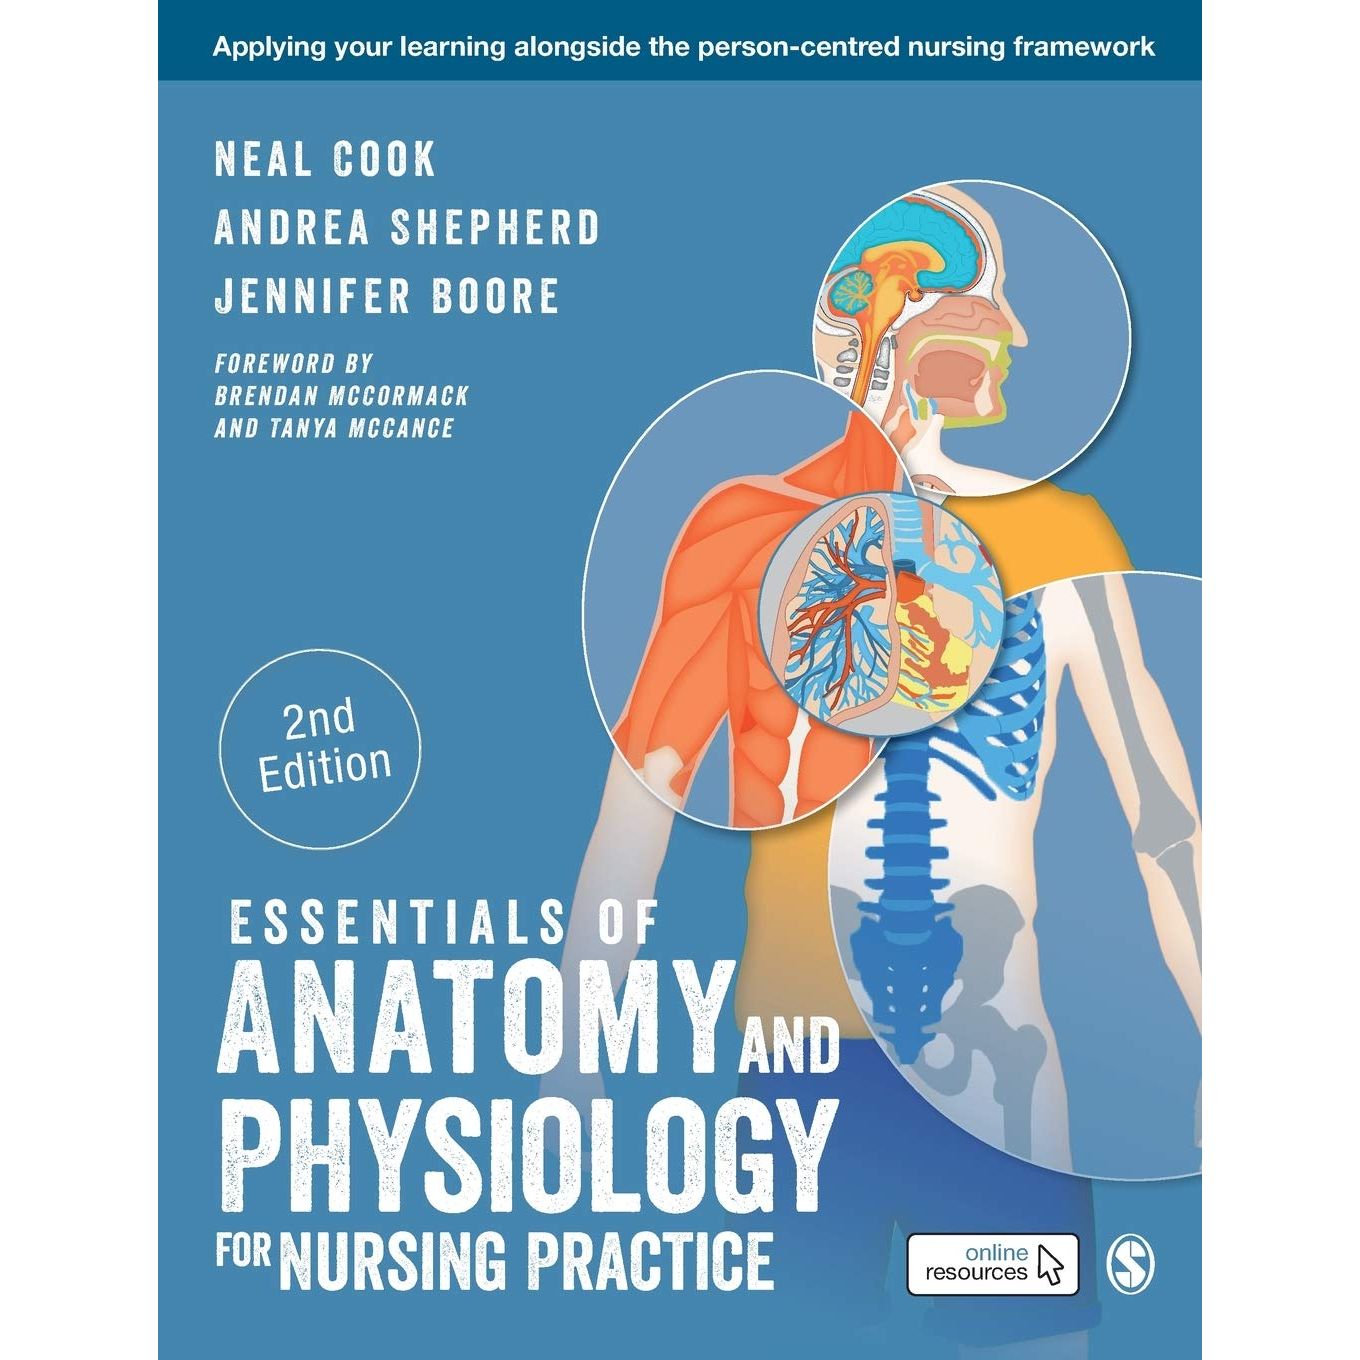 Physiology　Nursing　Essentials　Anatomy　of　and　for　Practice